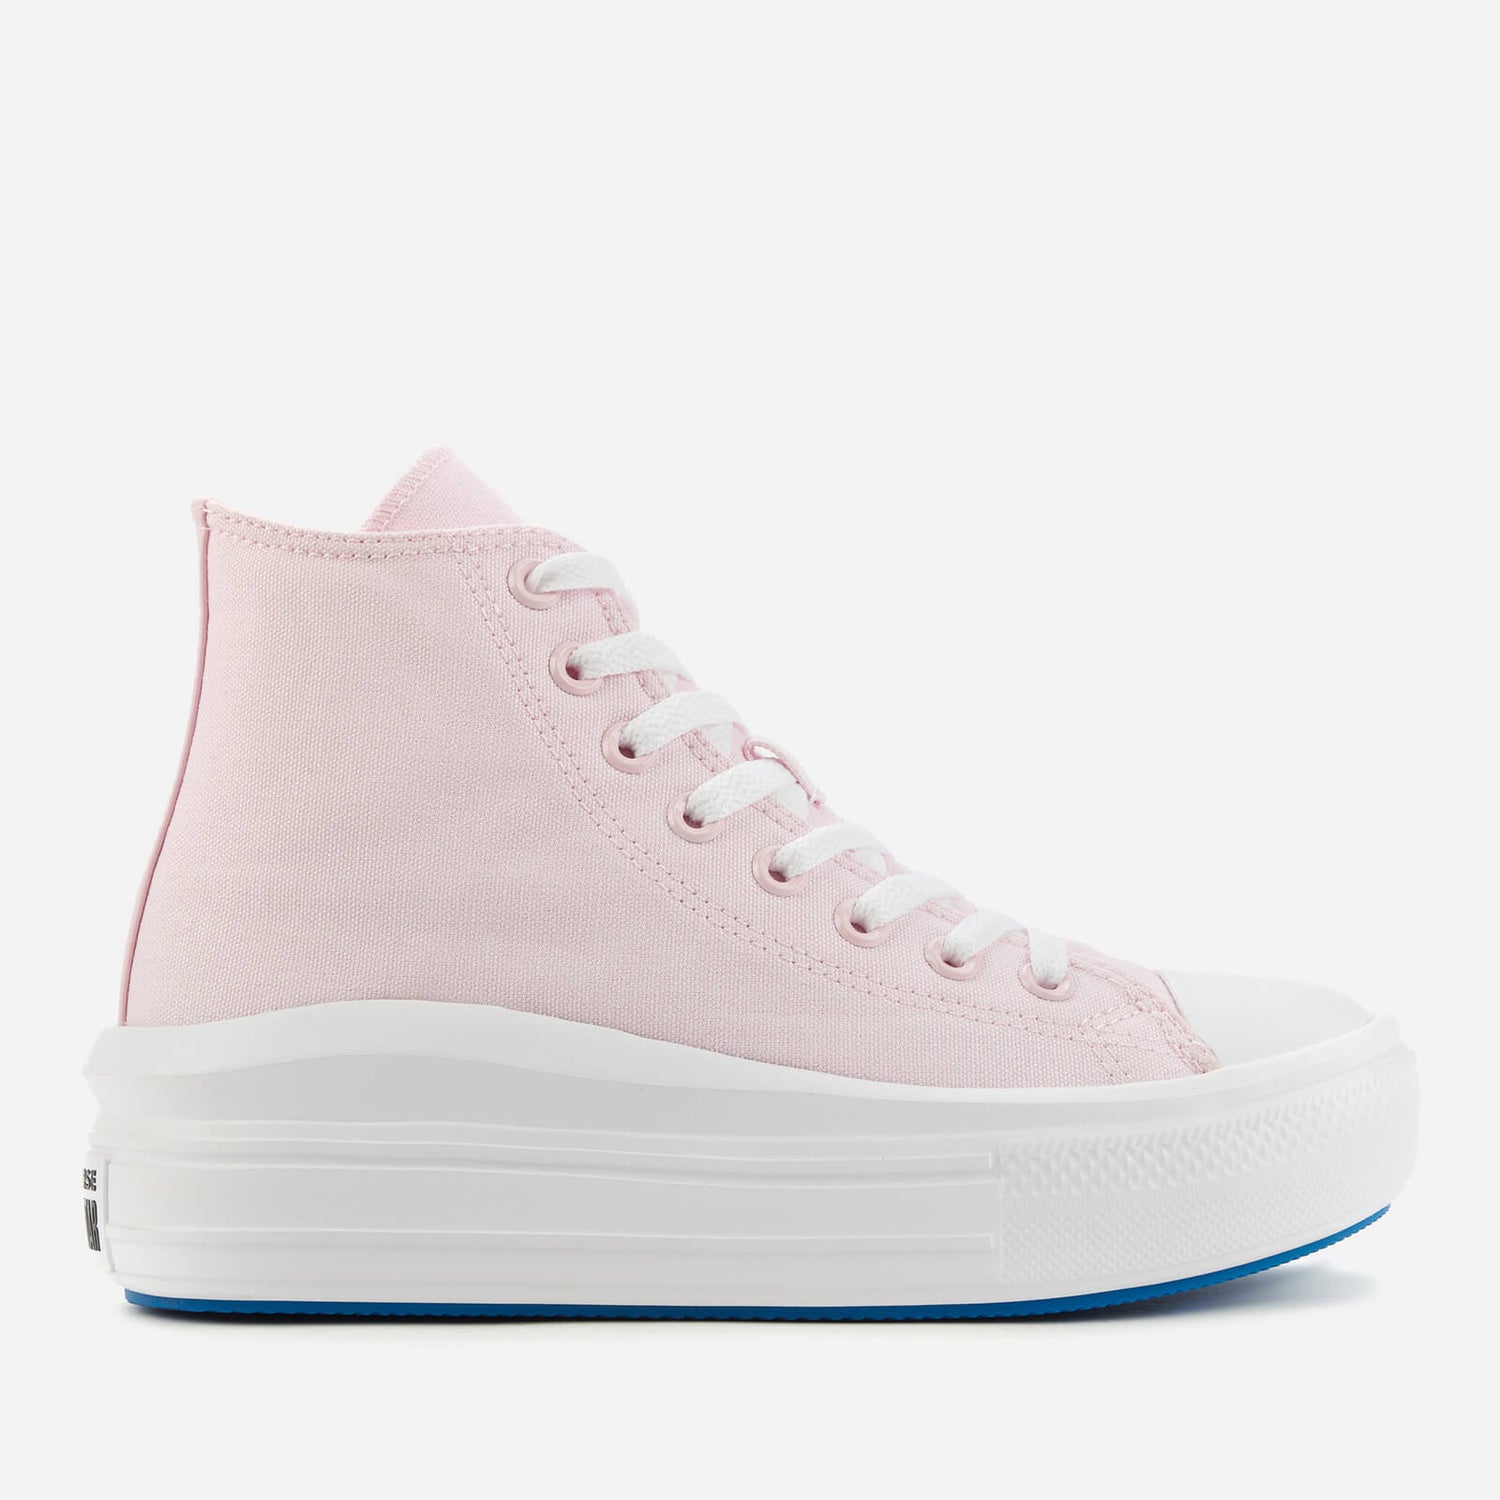 Converse Women's Chuck Taylor All Star Anodized Metals Move Hi-Top Trainers - Pink